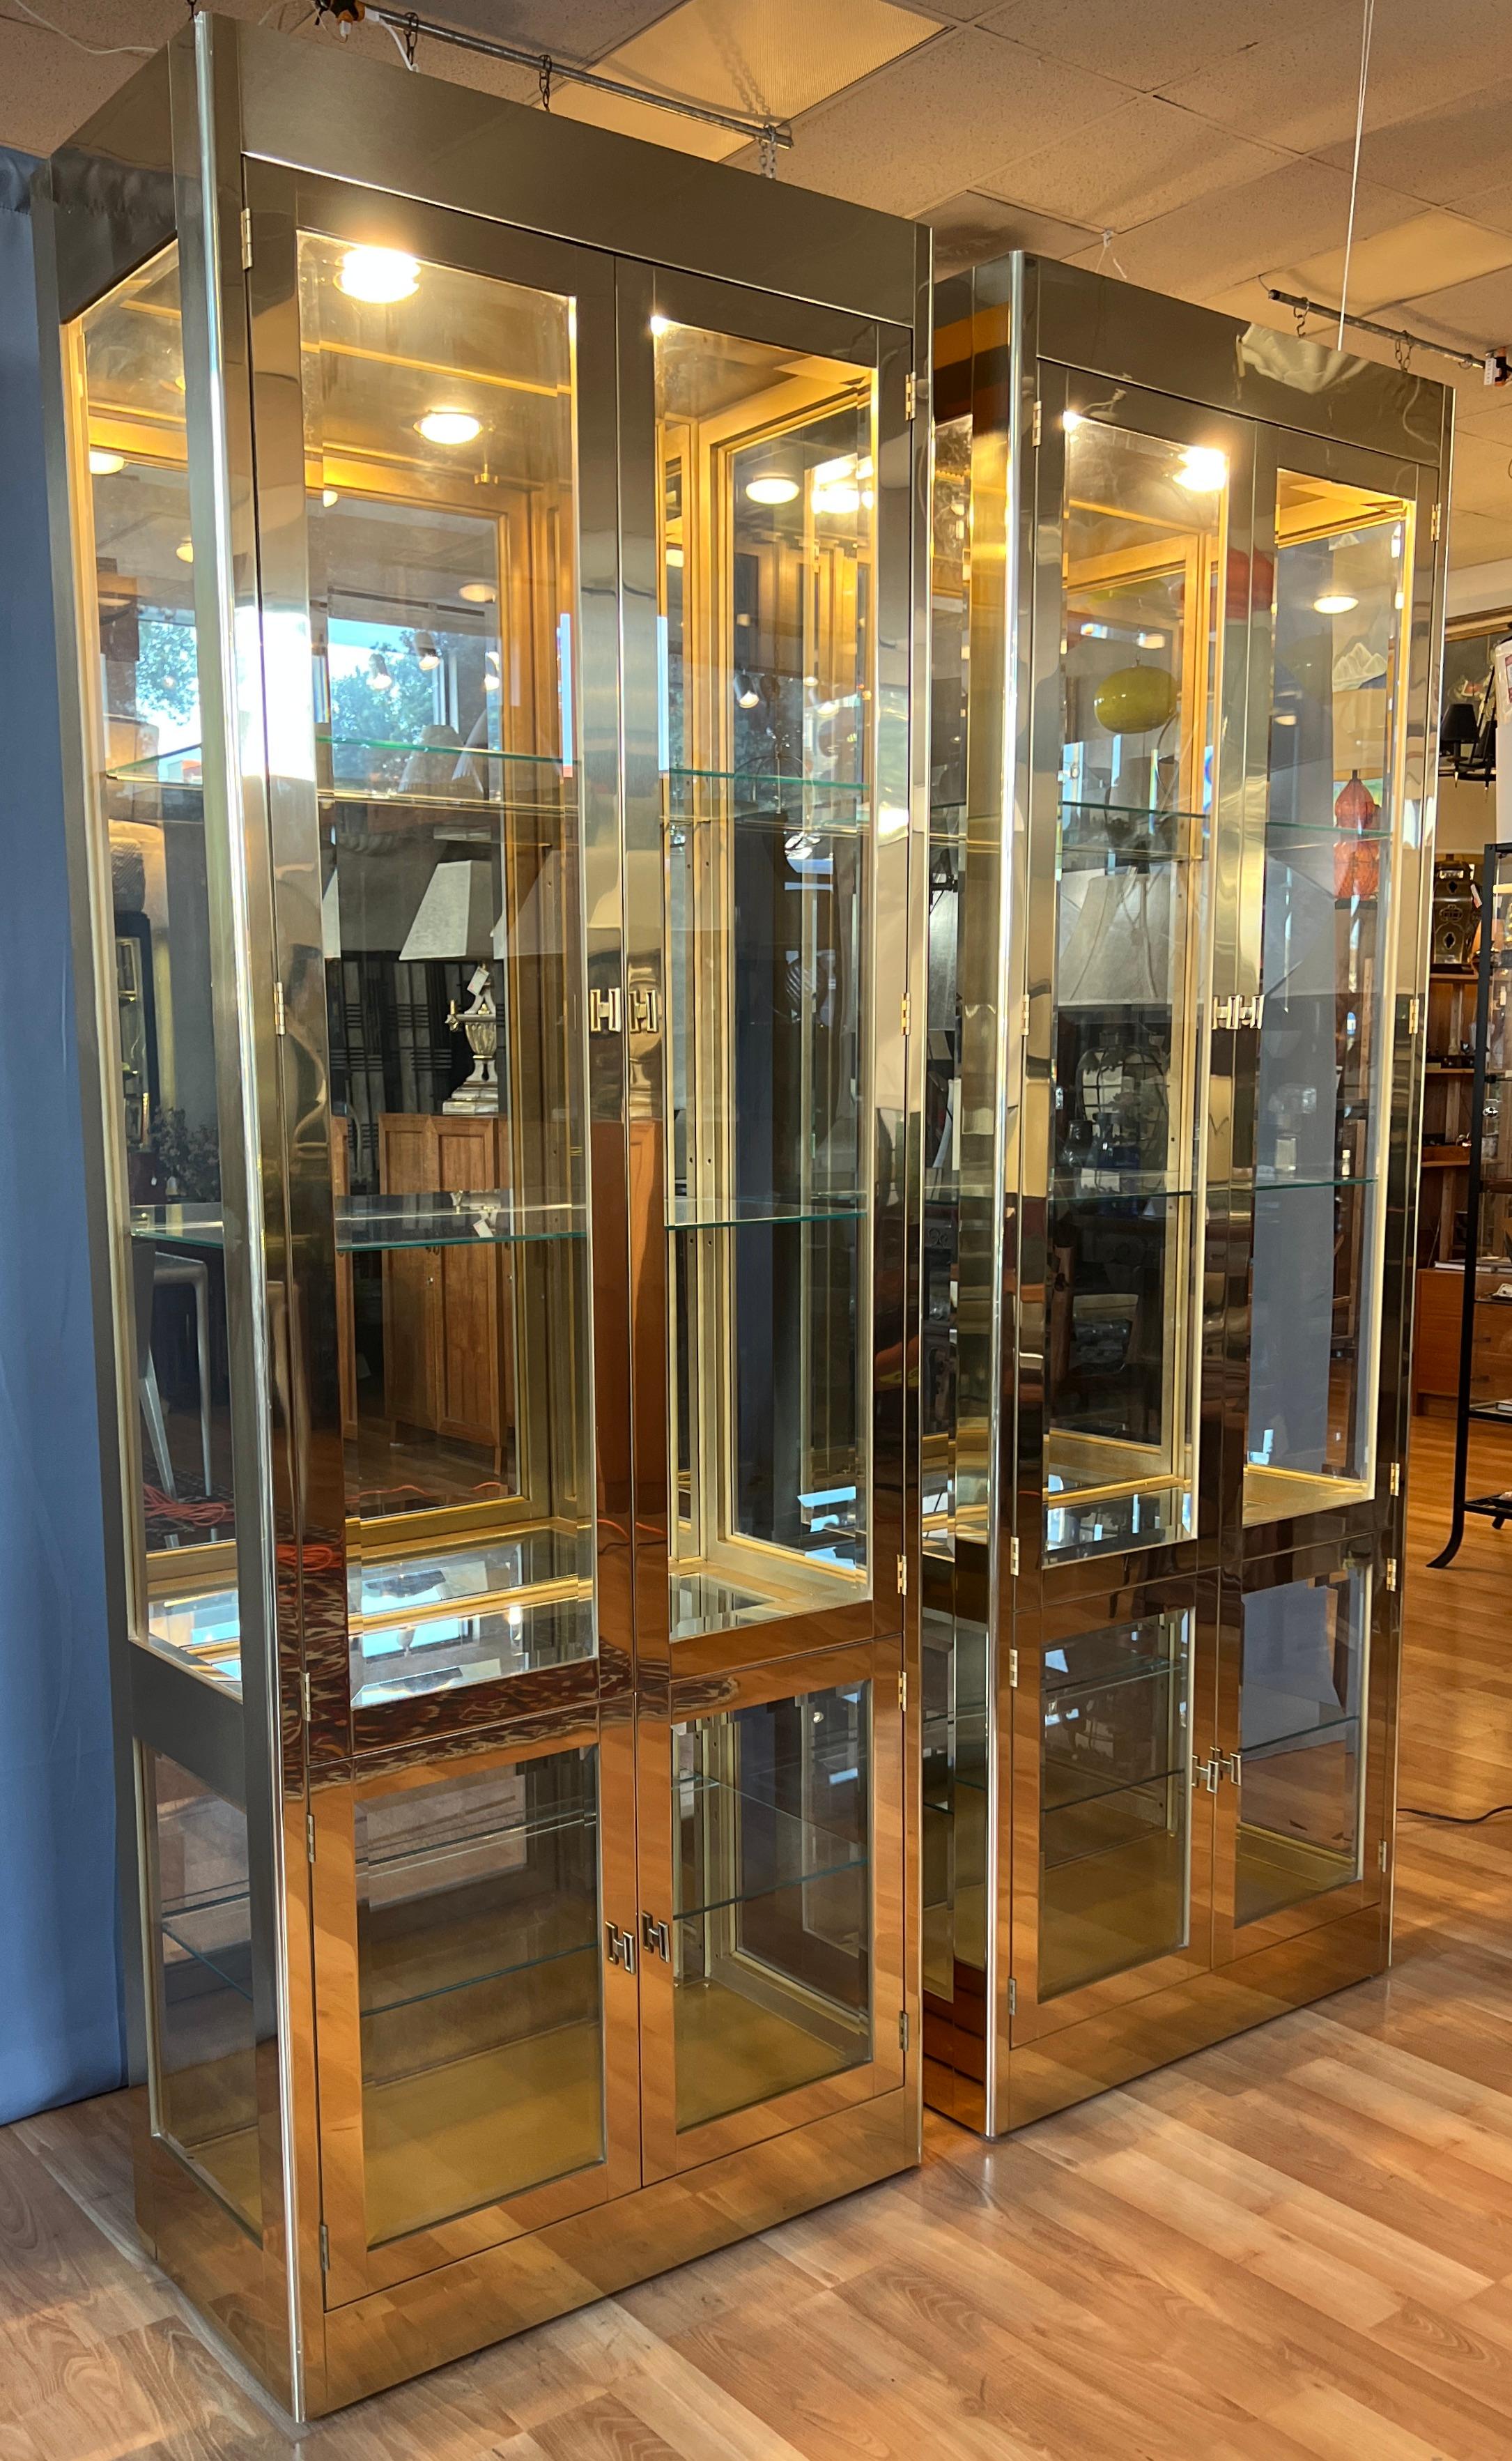 Offered here are a pair of stunning and monumental 1970s Brass vitrines, by Mastercraft.

Two lacquered Brass vitrines, with two cabinets in each unit, both with a glass shelf in-between so the two spot lights with dimmers can shine through to the